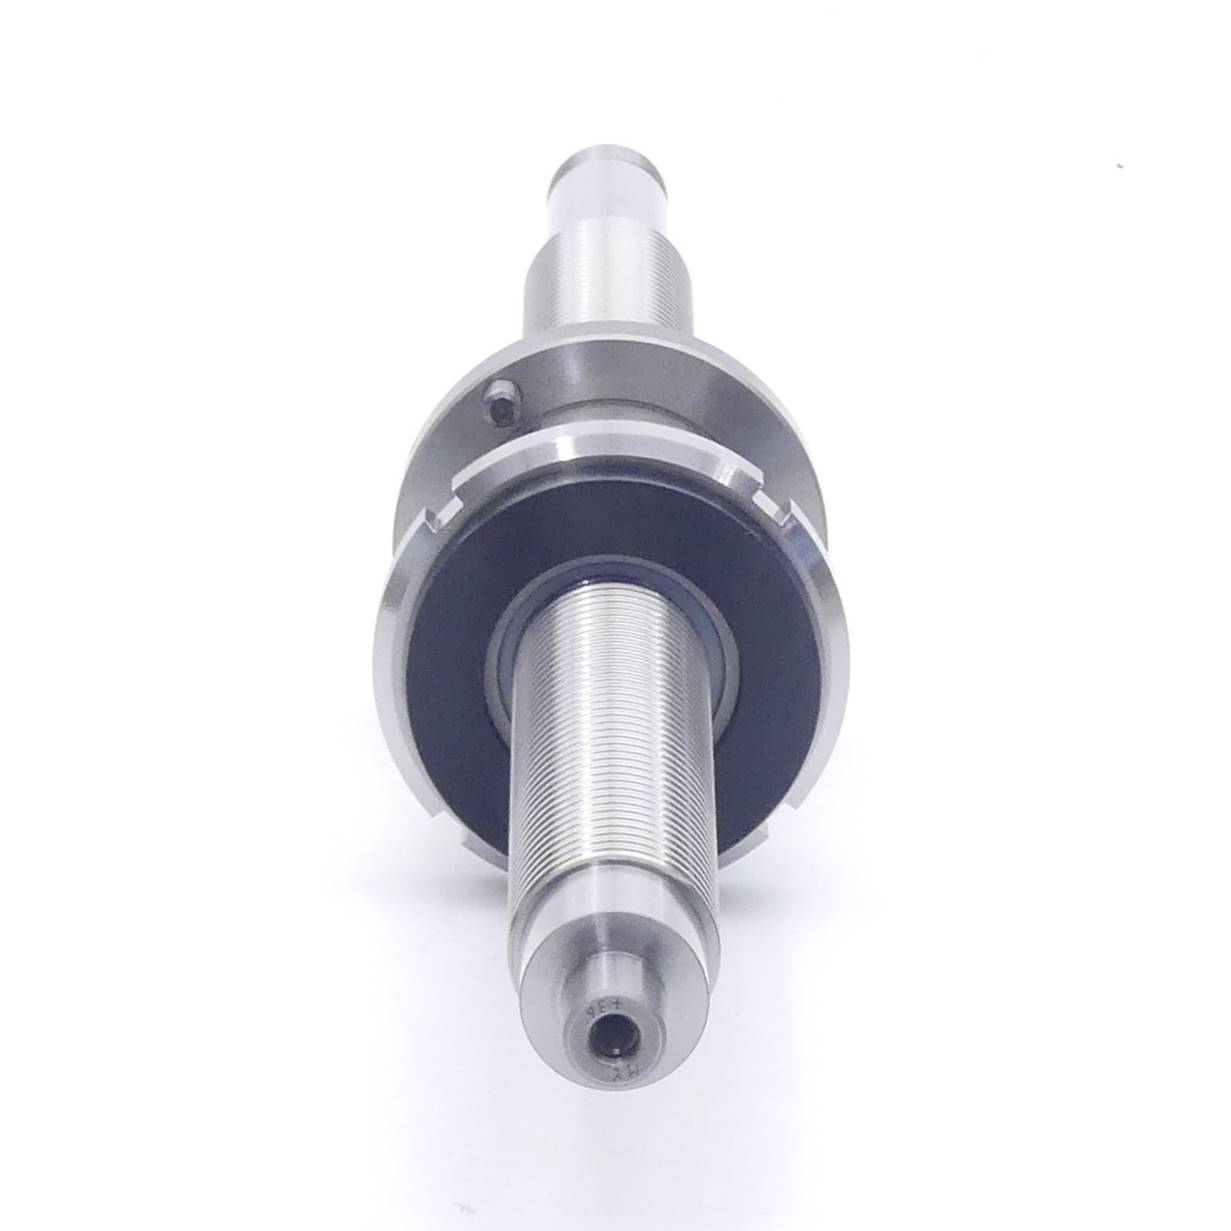 Ball screw drive / spindle TS842500101 